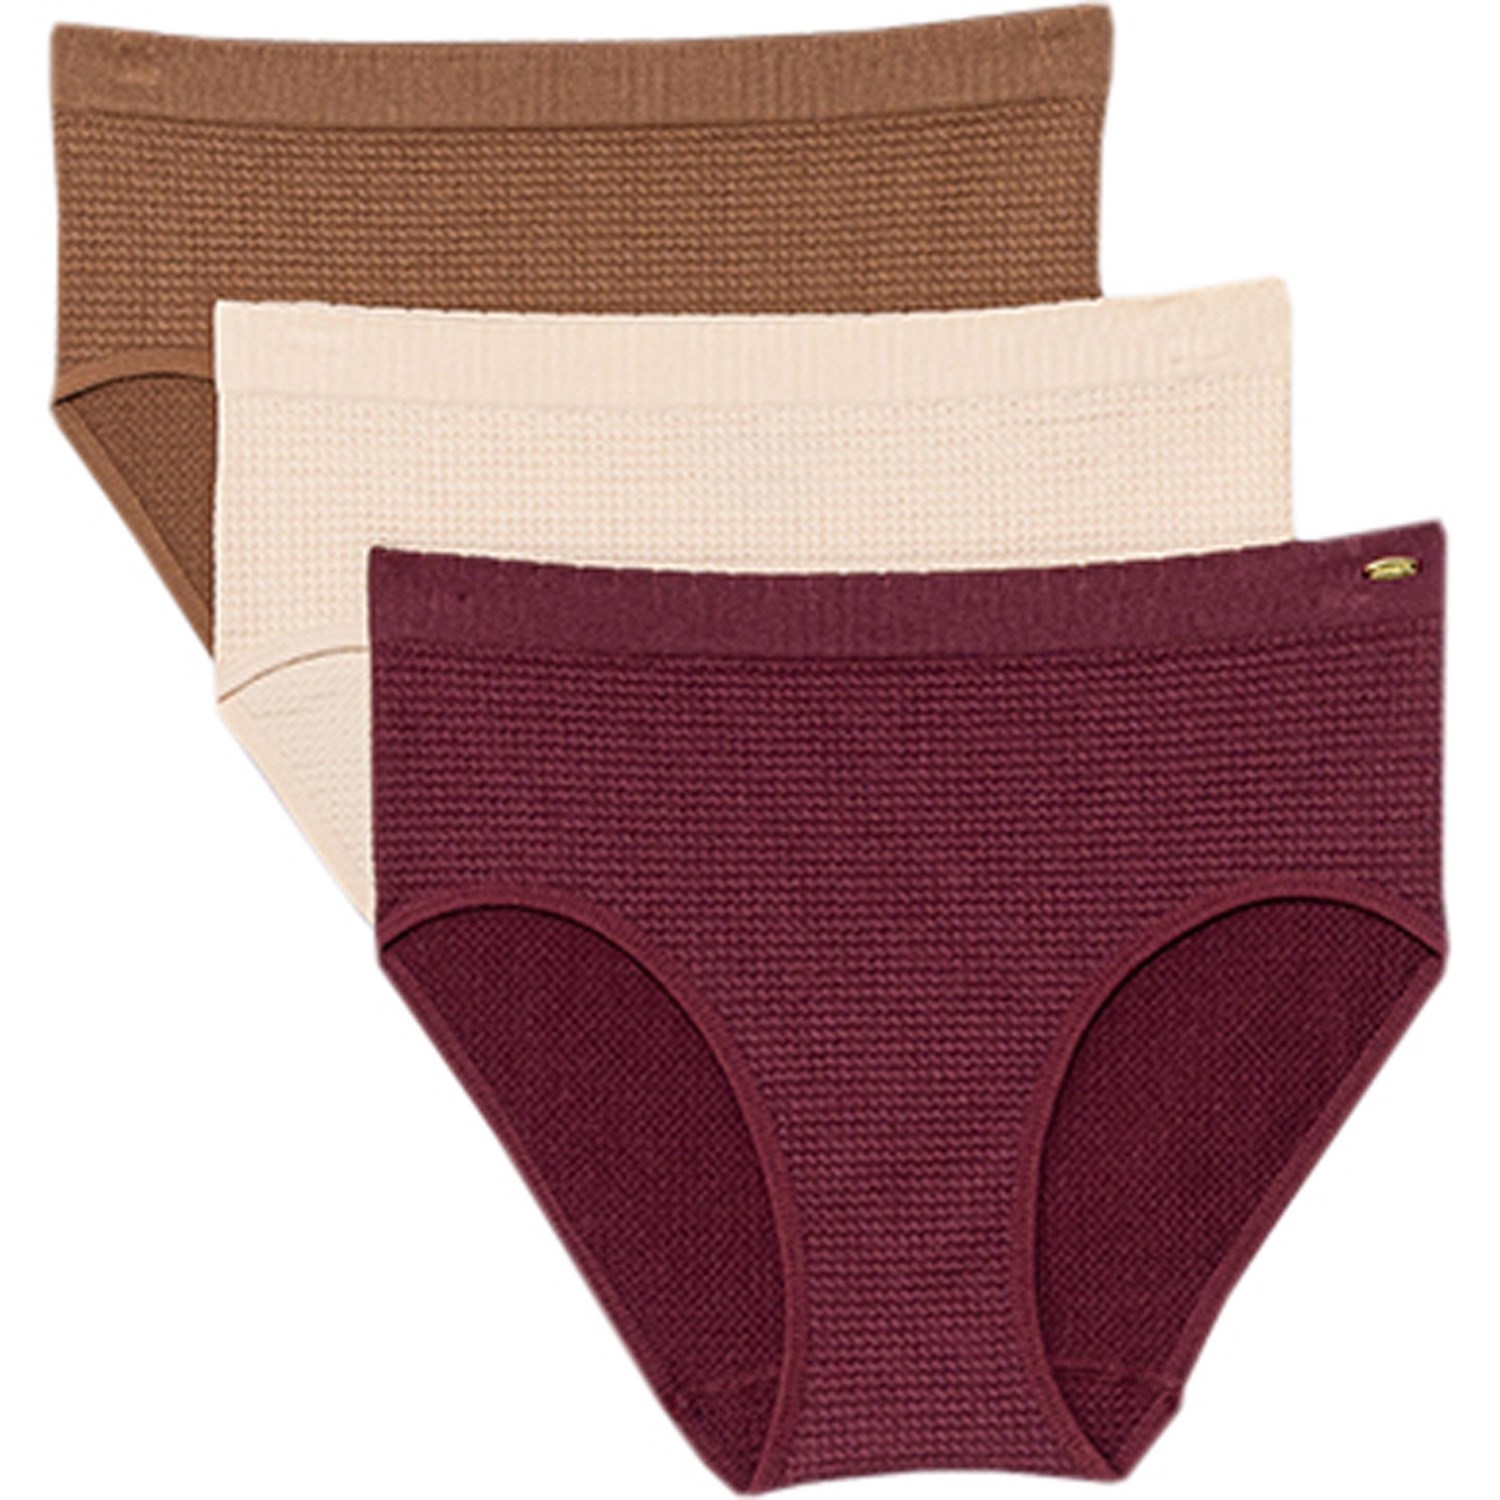 CAPEZIO Tuck Stitch Waffle-Knit Panties - 3-Pack, Brief - Save 60%